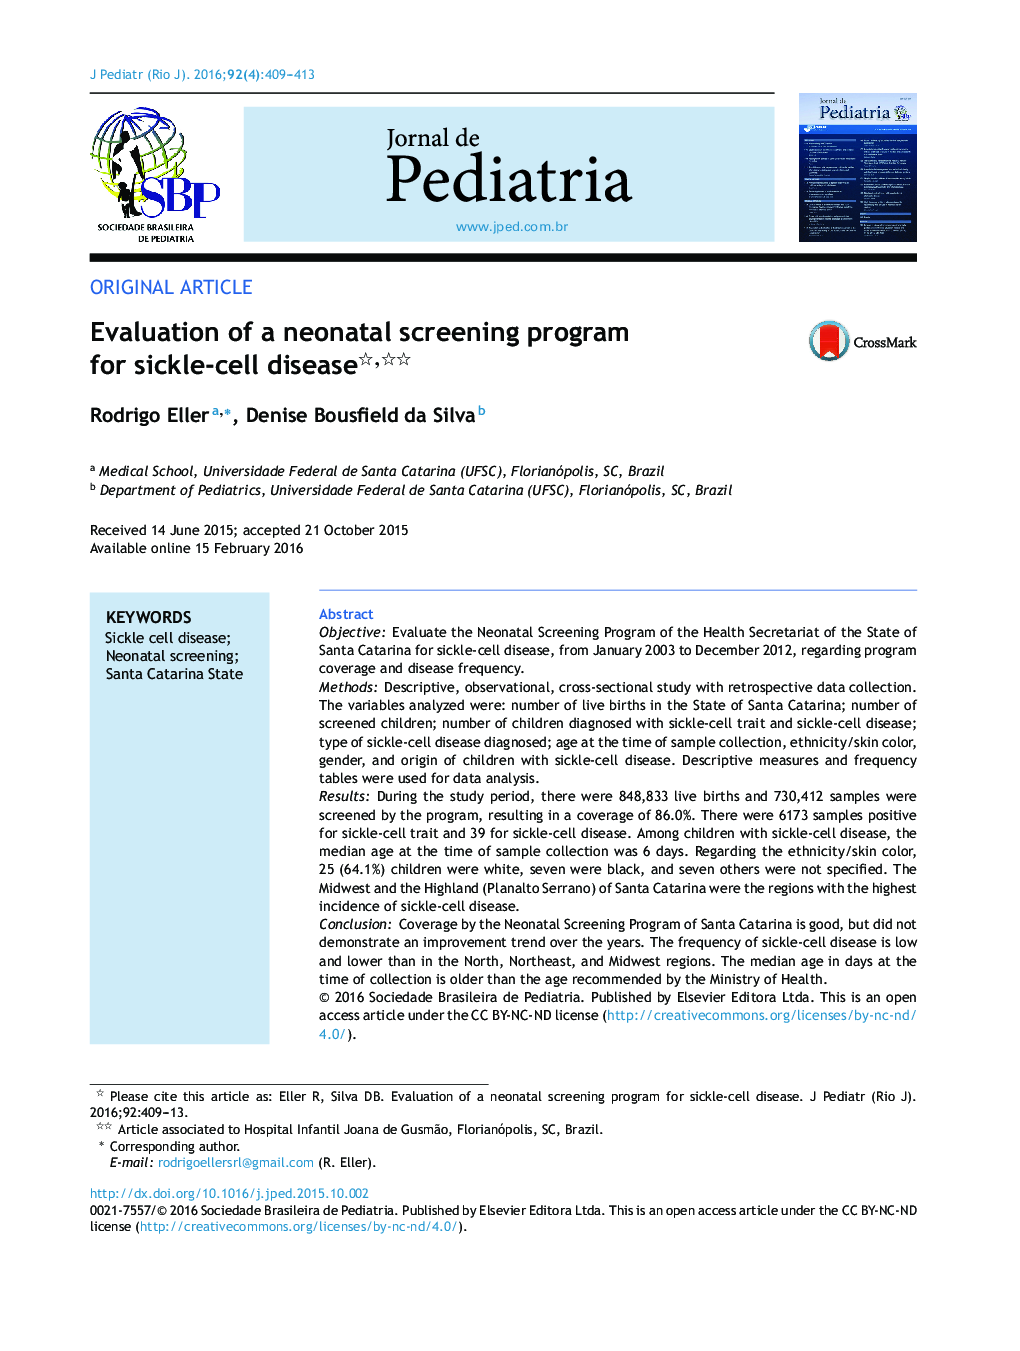 Evaluation of a neonatal screening program for sickle-cell disease 